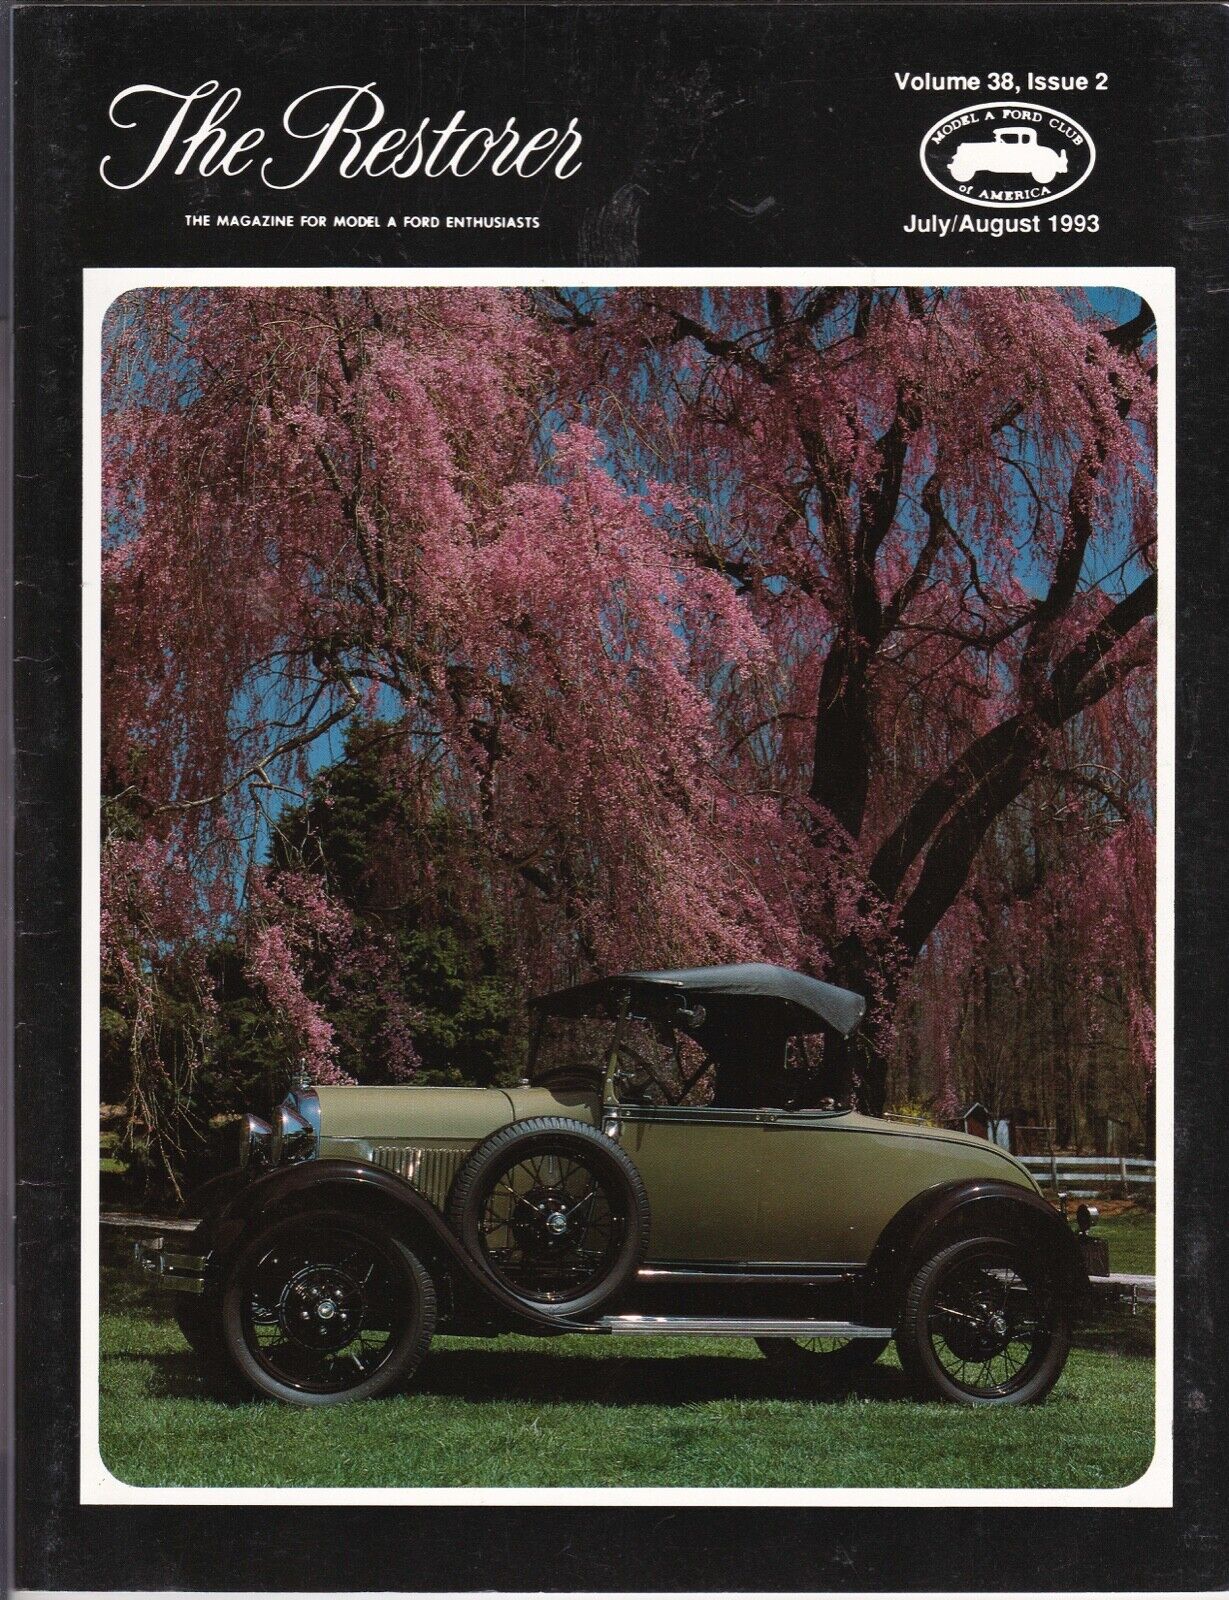 1928 ROADSTER - THE VINTAGE FORD MAGAZINE - 1930-31 FLOORBOARD MODIFICATION